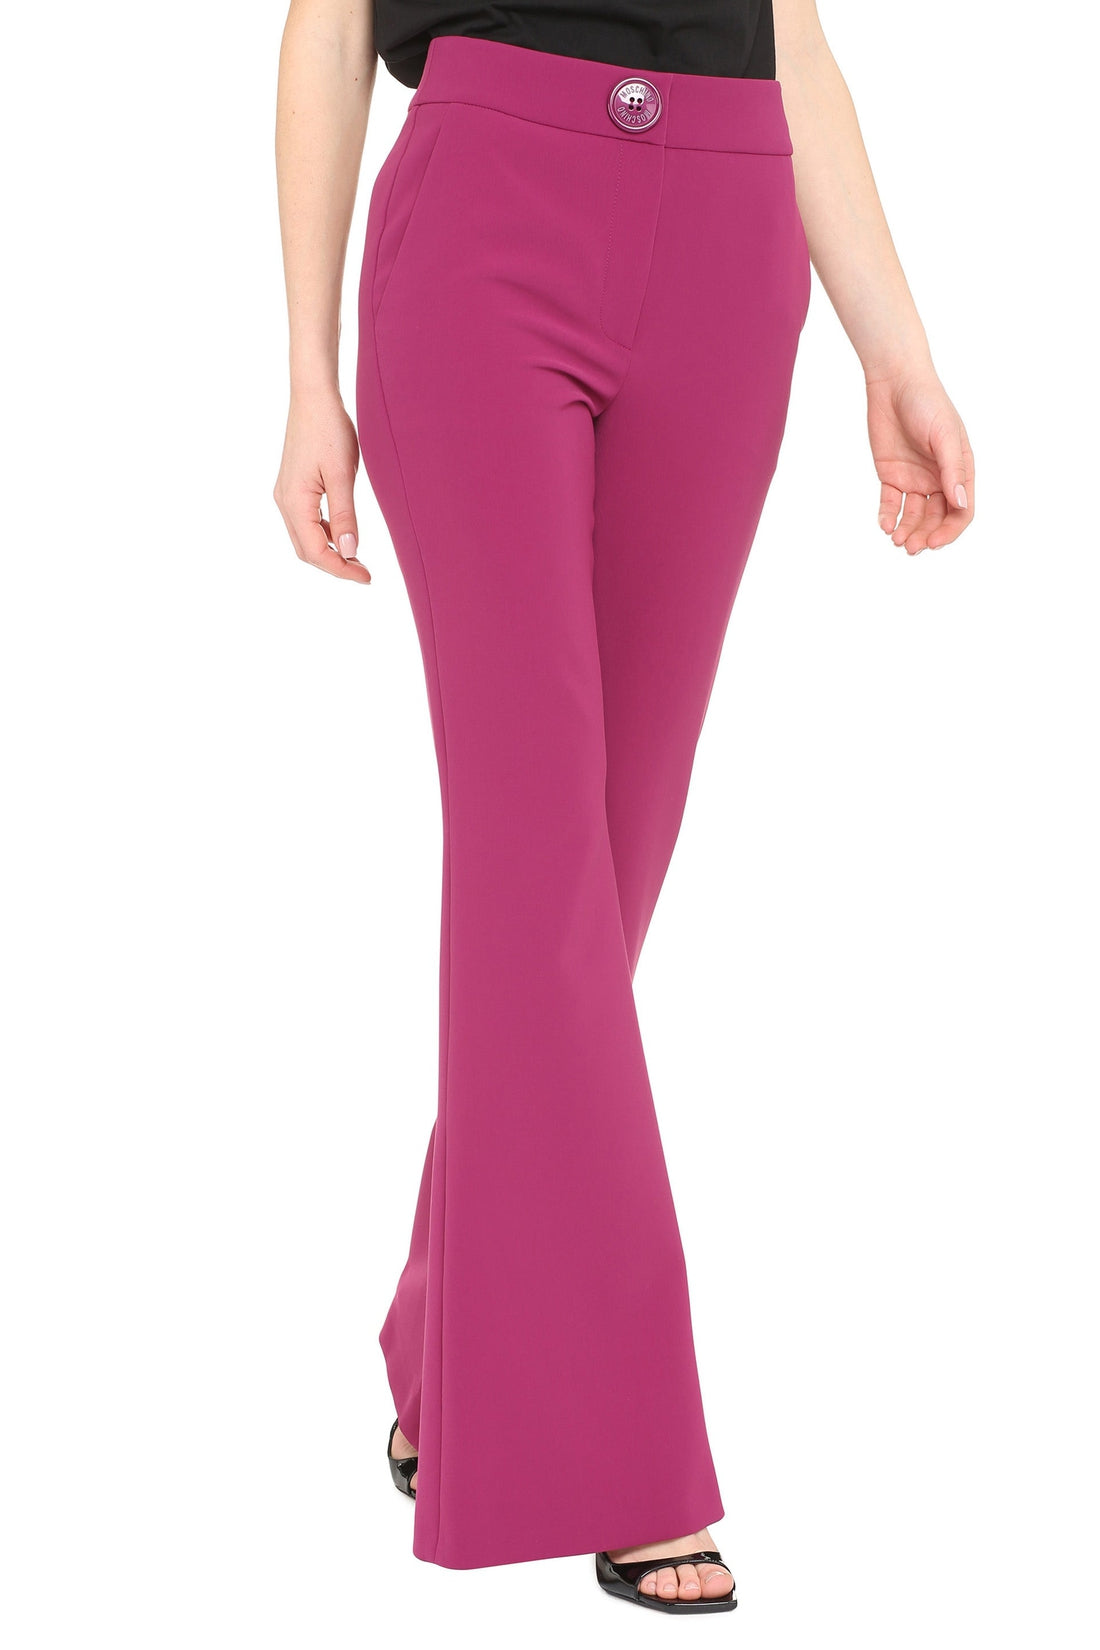 Moschino-OUTLET-SALE-Flared crêpe trousers-ARCHIVIST